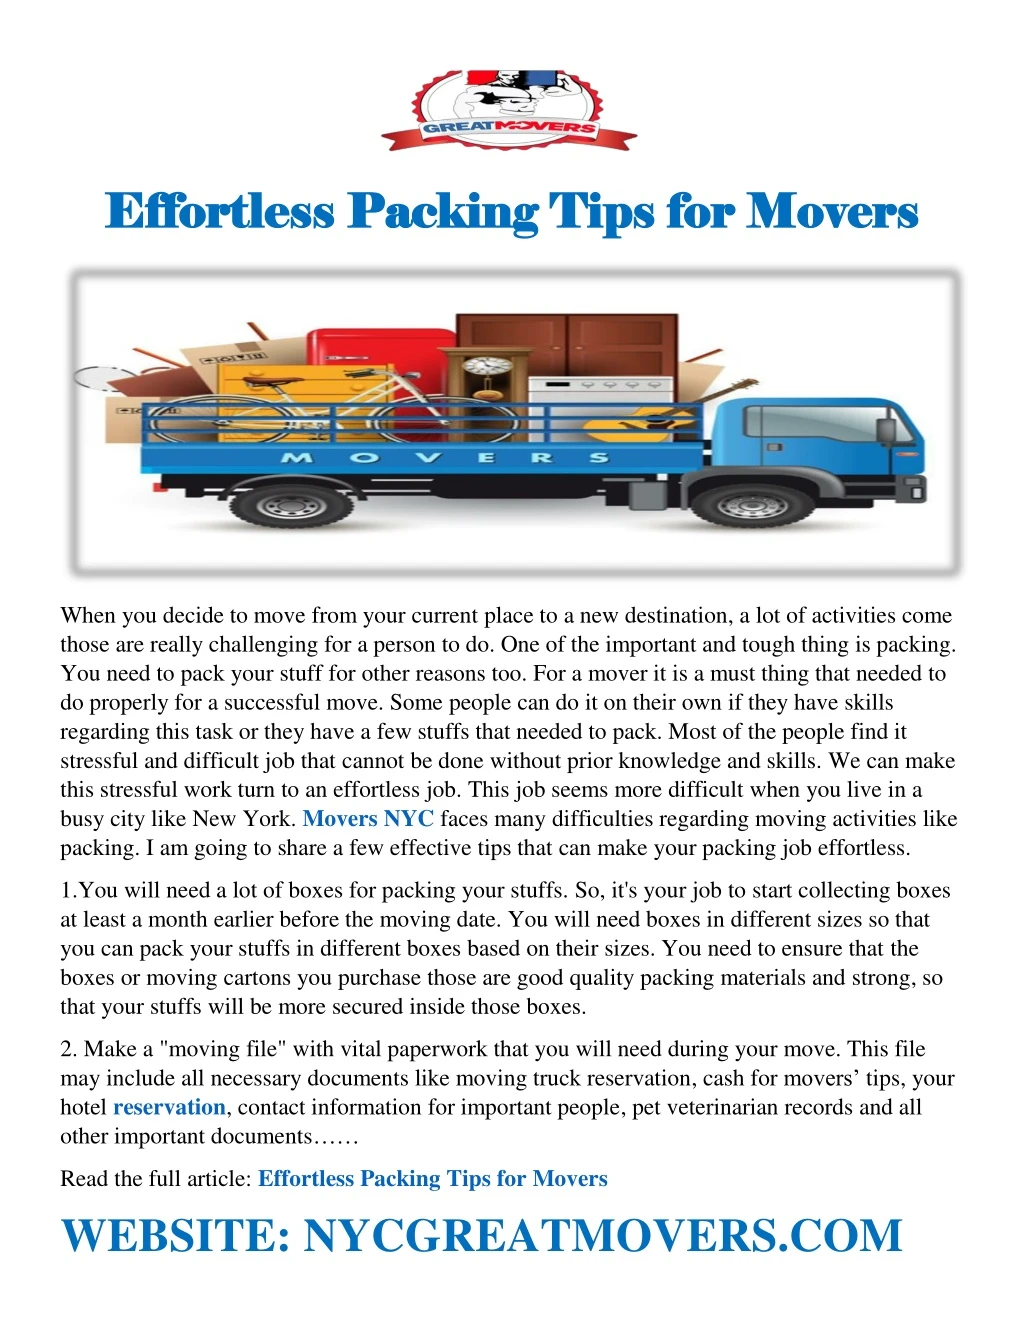 eff effortless ortless packing tips f packing